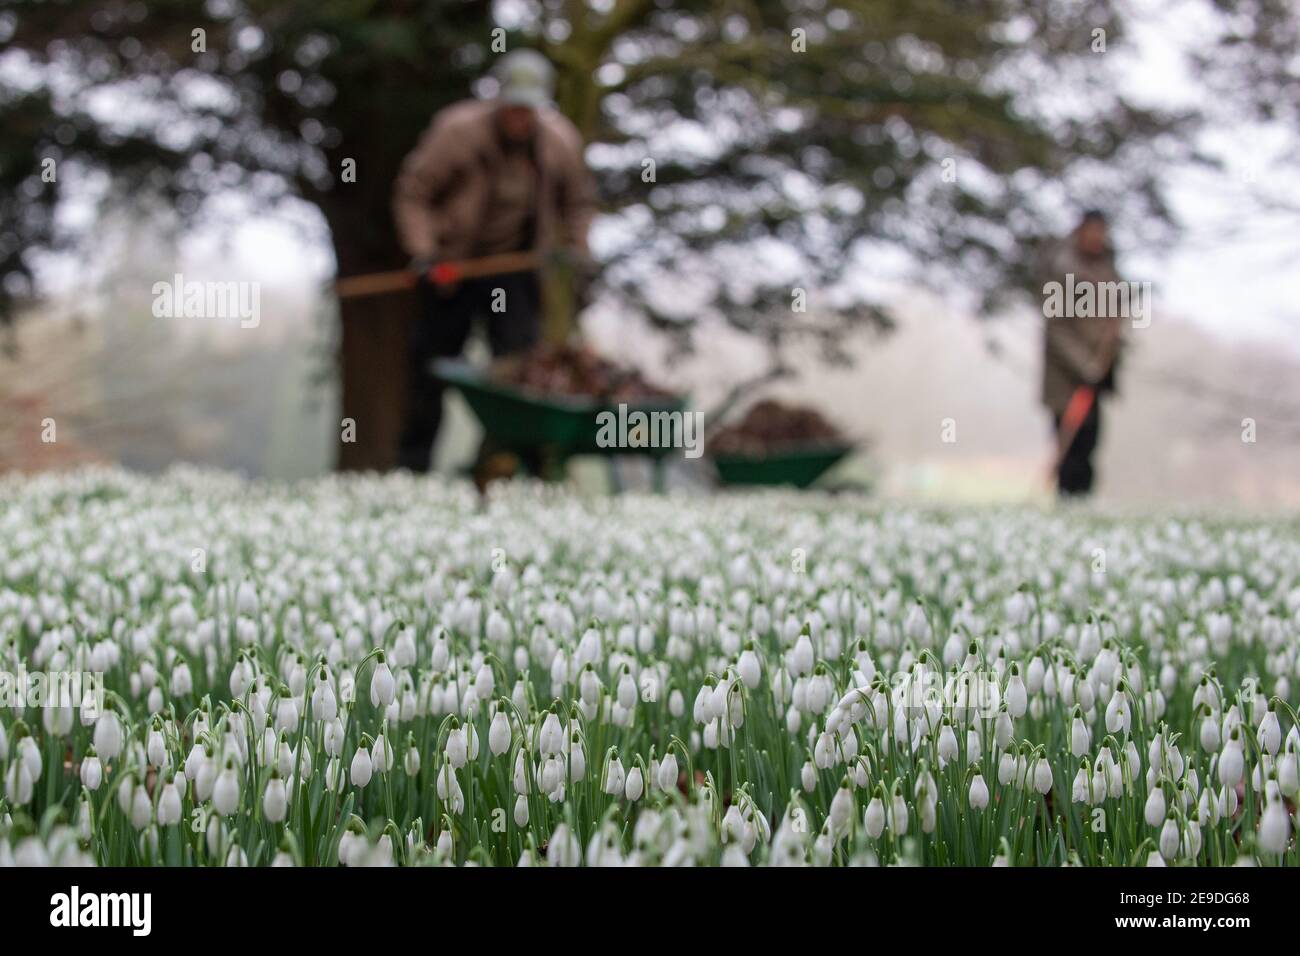 RETRANSMITTING CORRECTING SPELLING OF SAFFRON WALDEN CORRECT CAPTION BELOW  Gardeners tend to the first snowdrops of the season at English Heritage's  Audley End House and Gardens in Saffron Walden, Essex. Picture date: